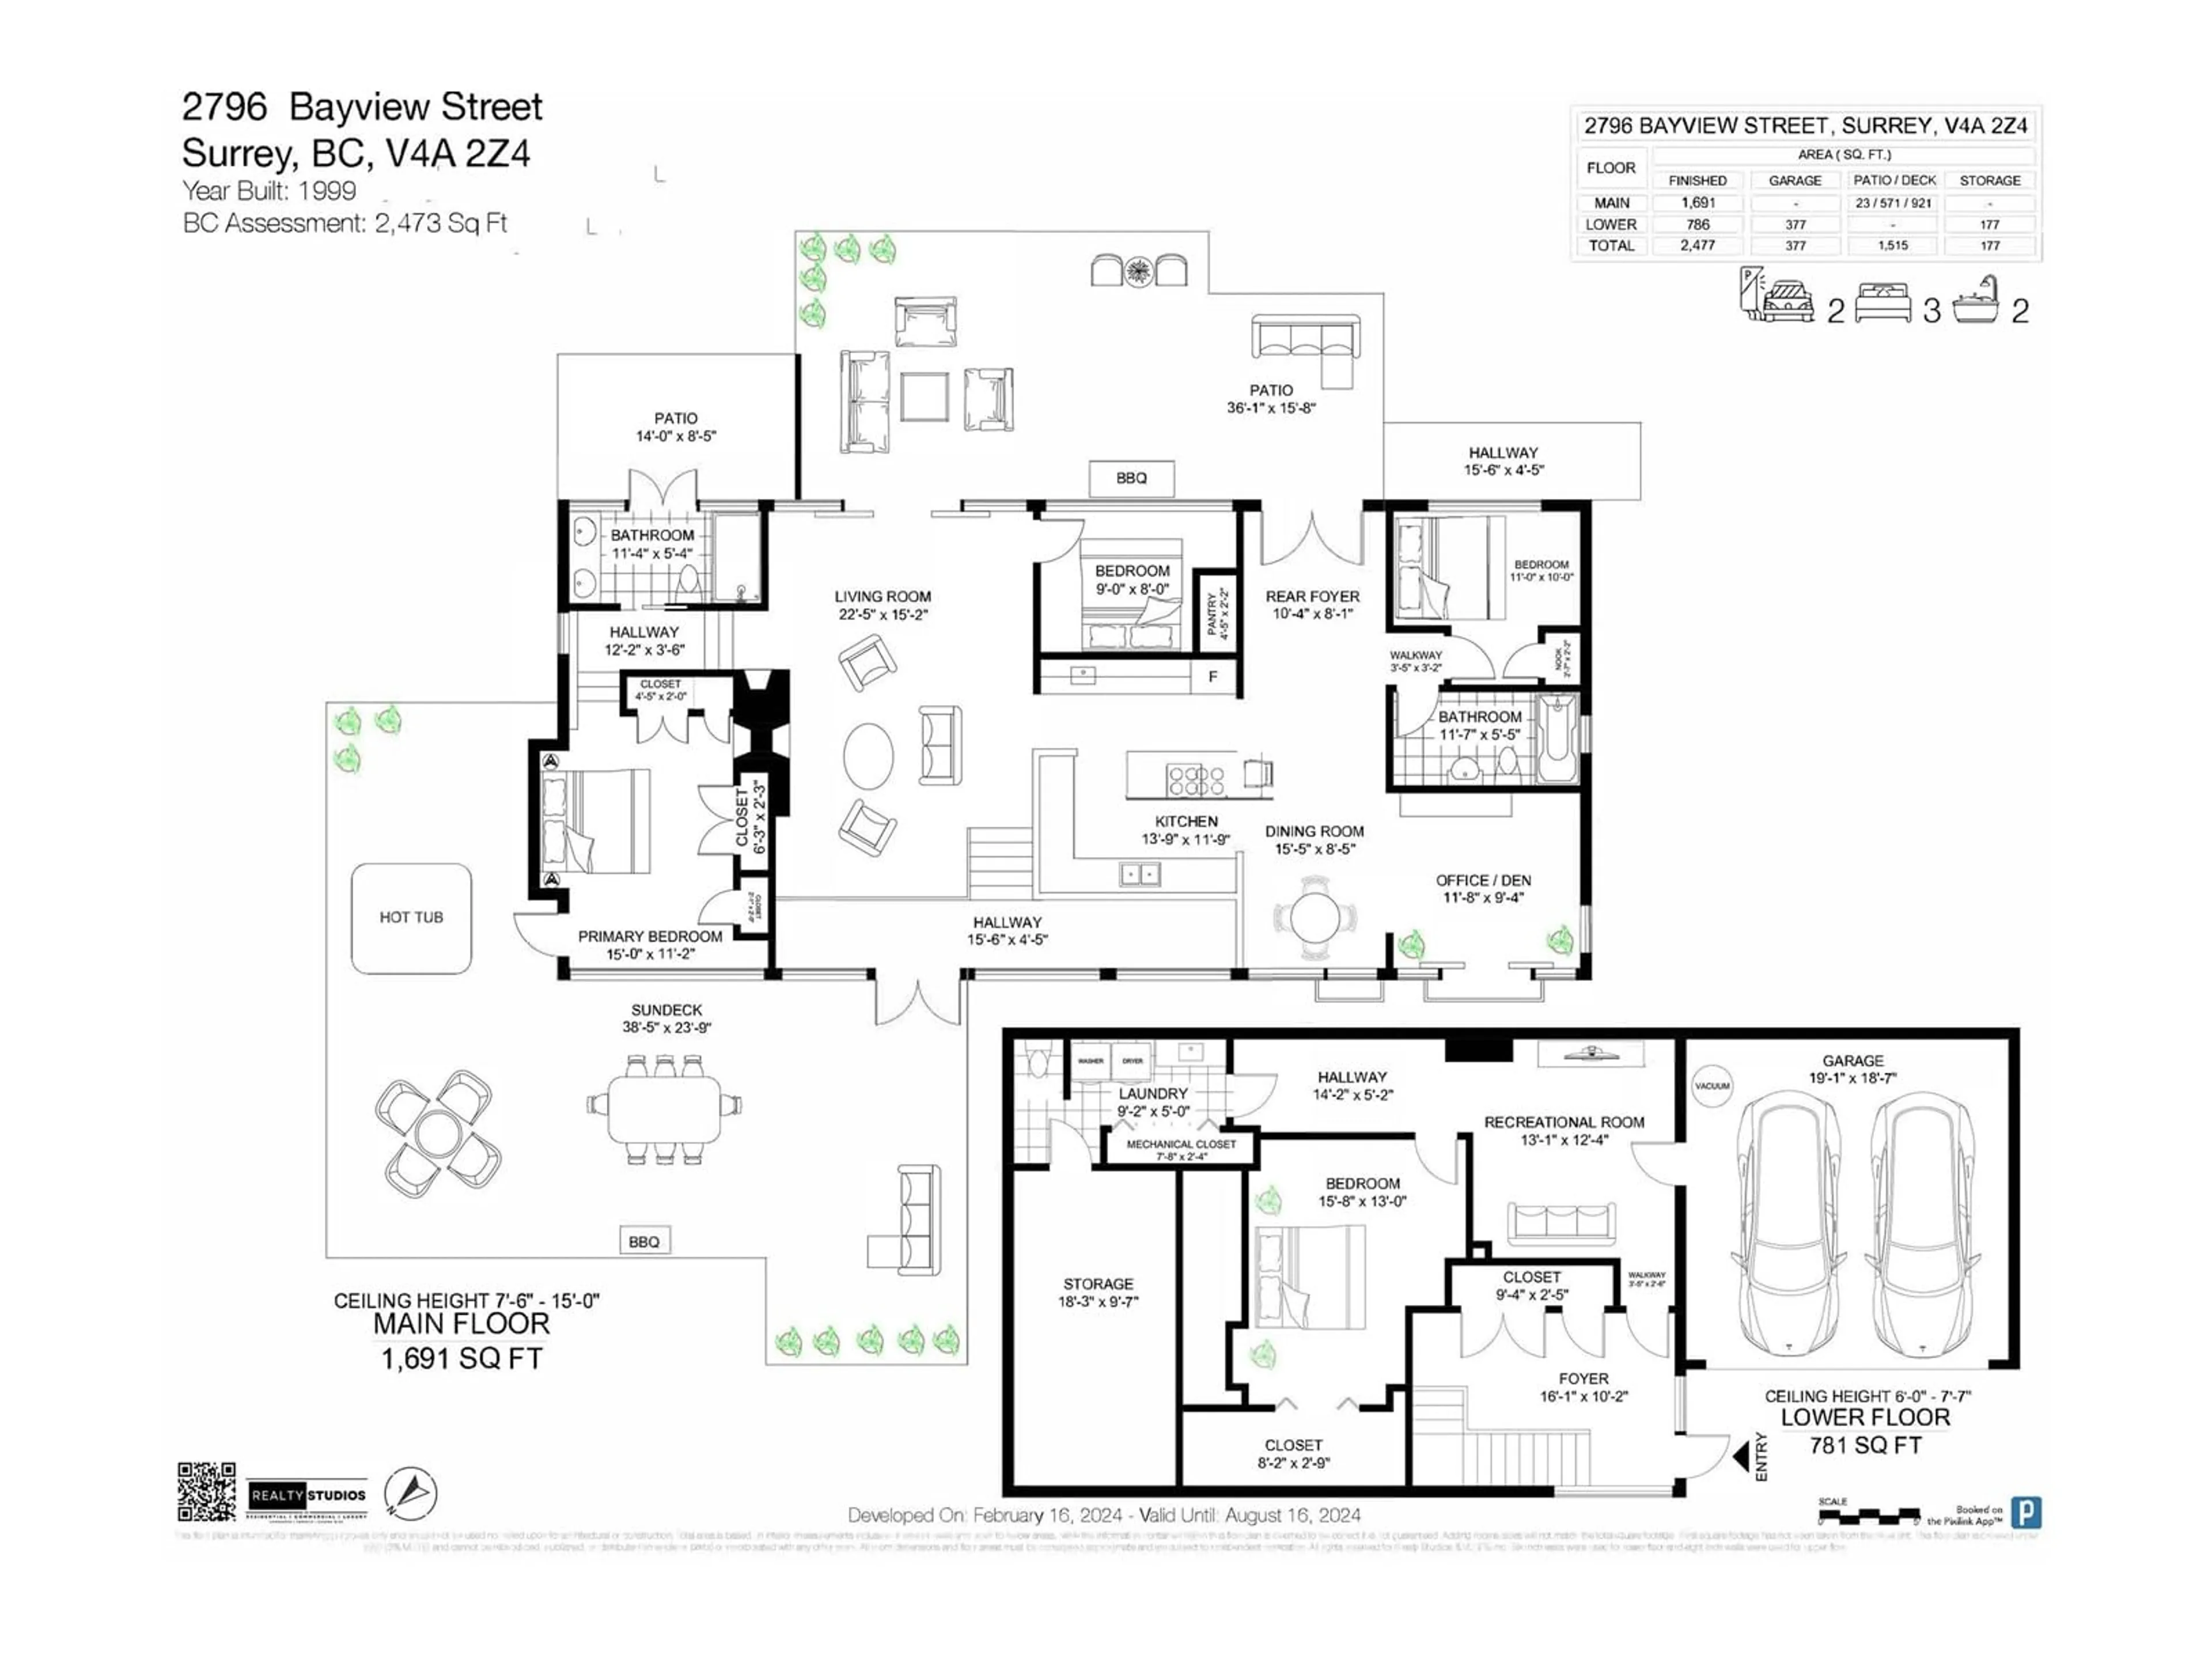 Floor plan for 2796 BAYVIEW STREET, Surrey British Columbia V4A2Z4